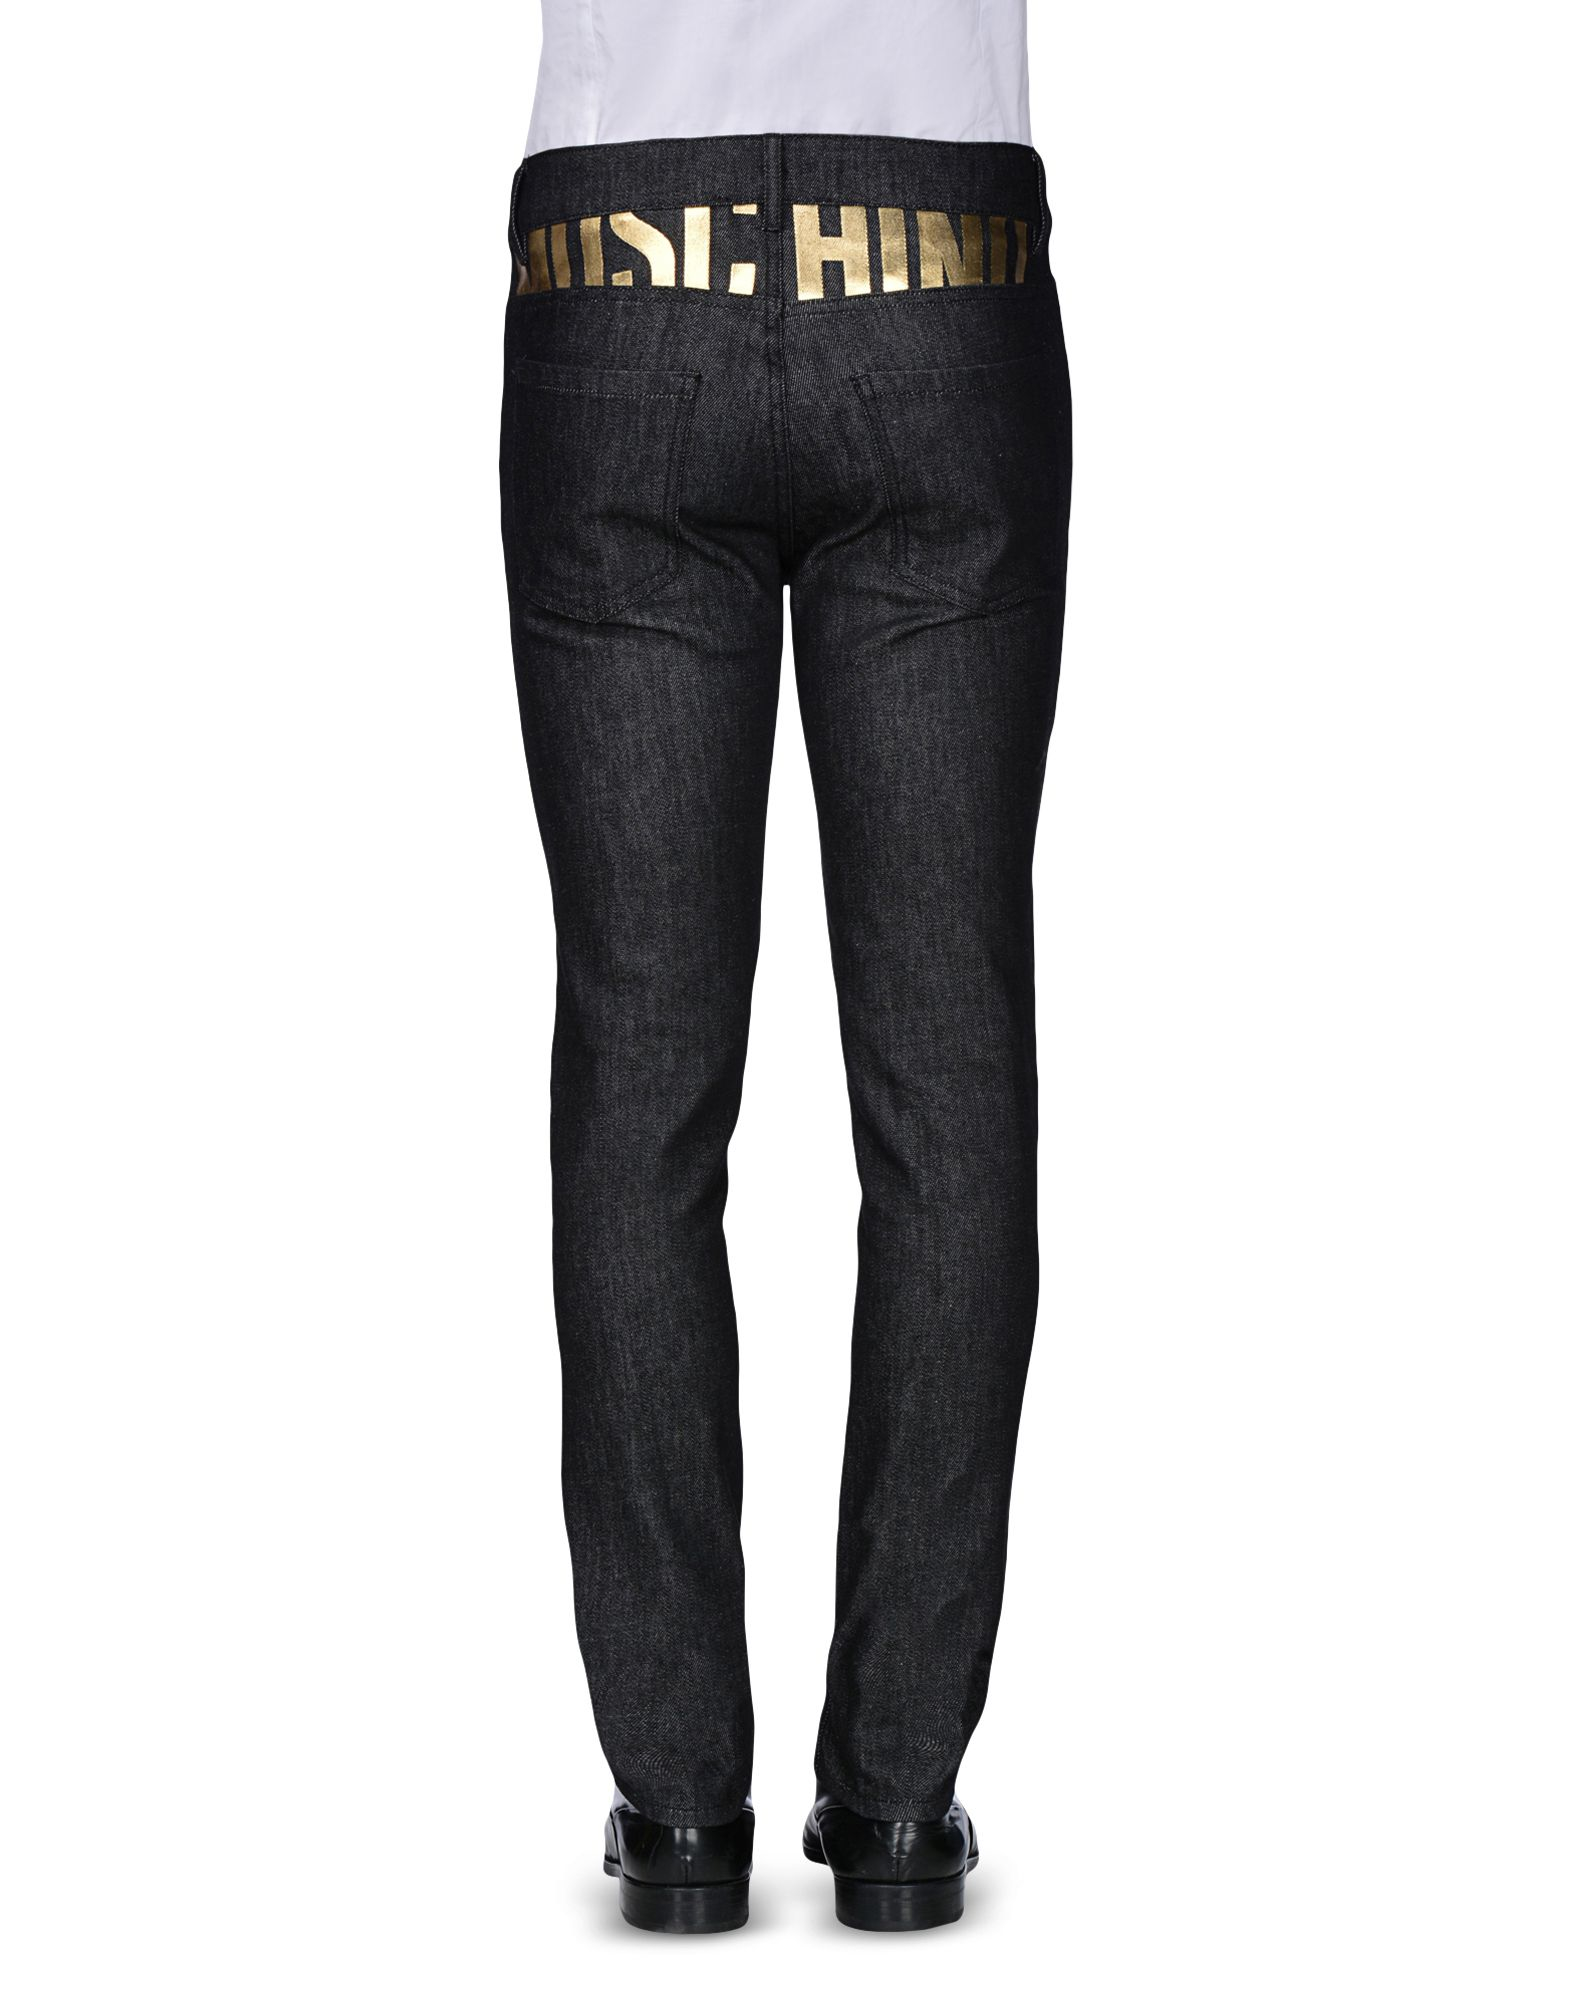 Lyst - Moschino Jeans in Black for Men